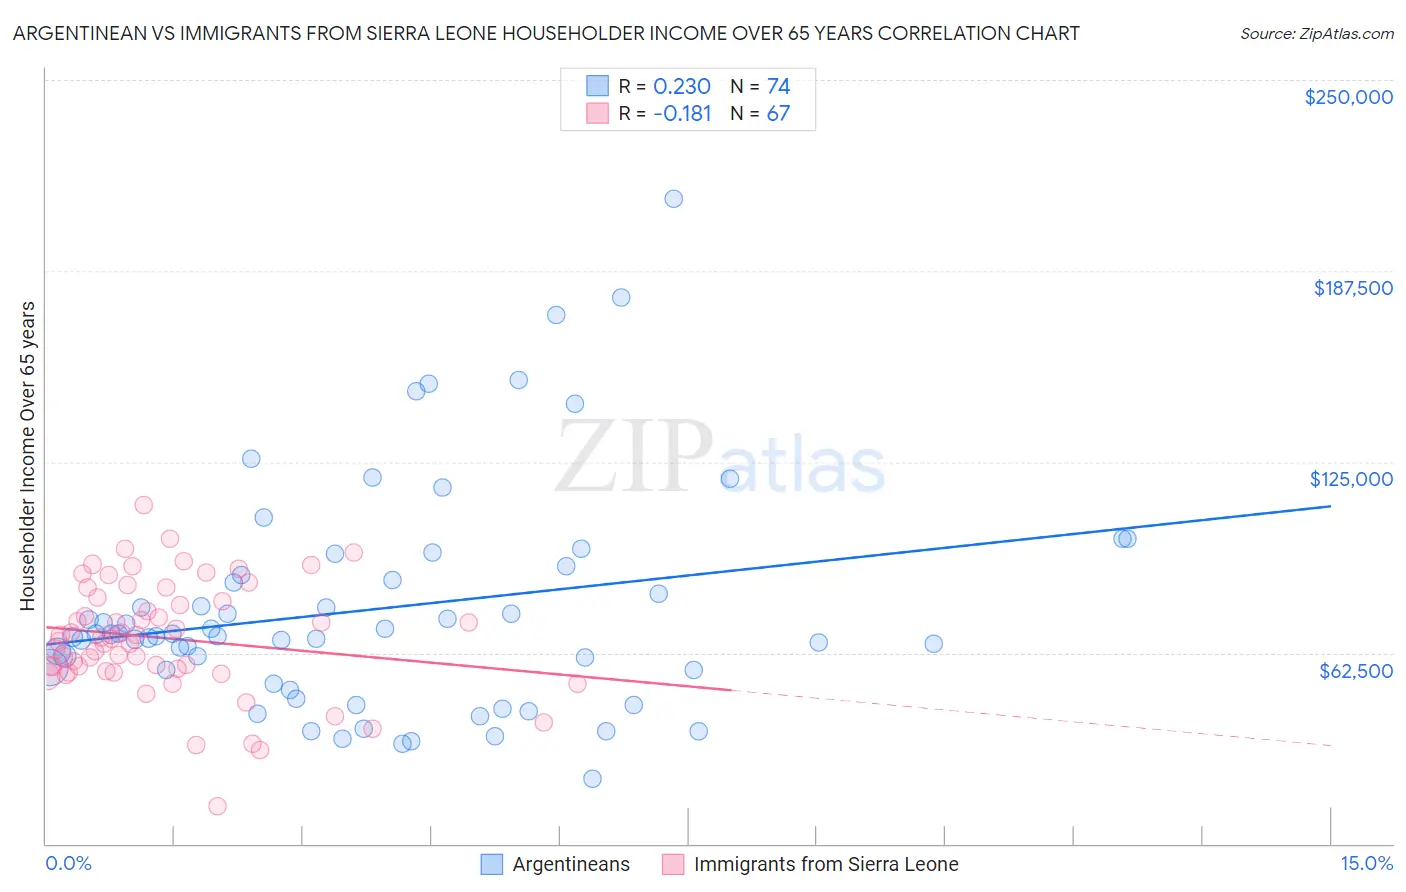 Argentinean vs Immigrants from Sierra Leone Householder Income Over 65 years